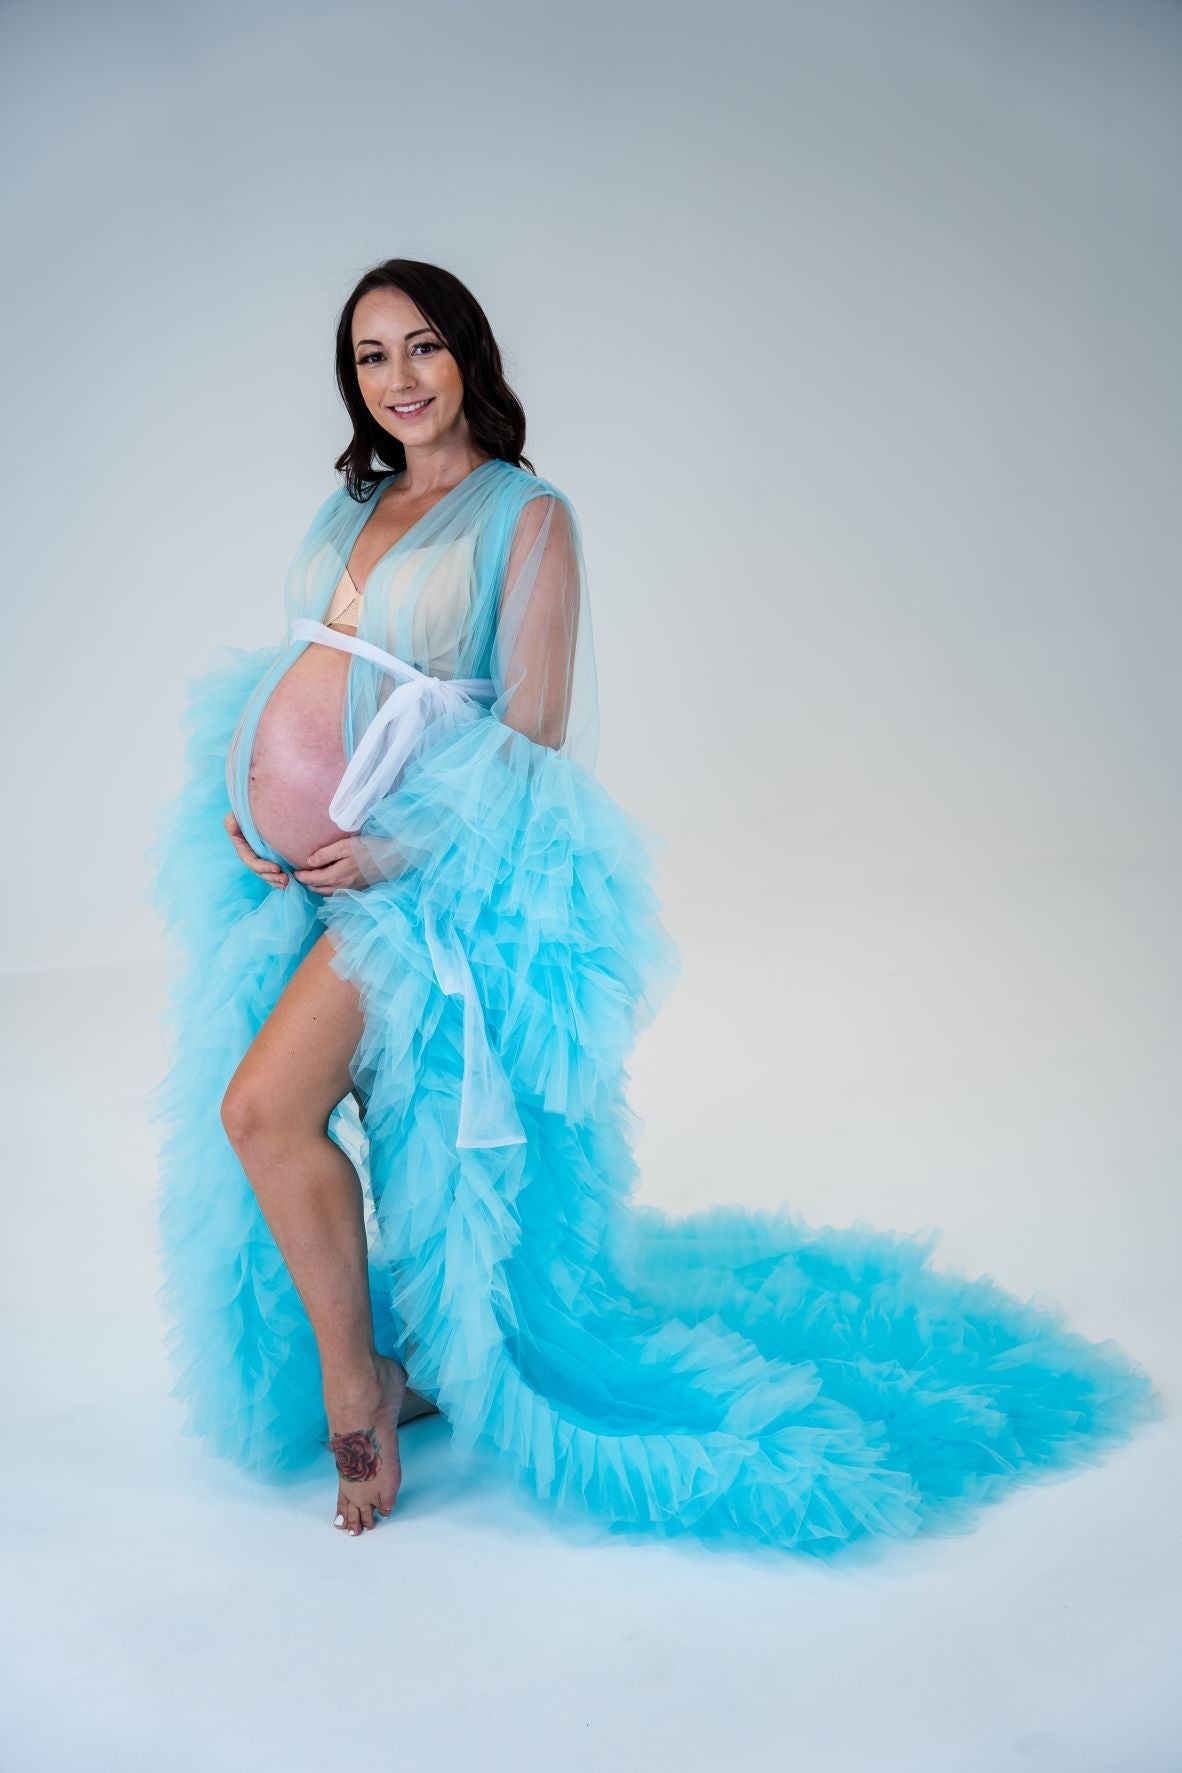 Dress Hire - Maternity Photoshoot Dresses - Baby Blue Tulle Robe - Sophie - Luxe Bumps AU